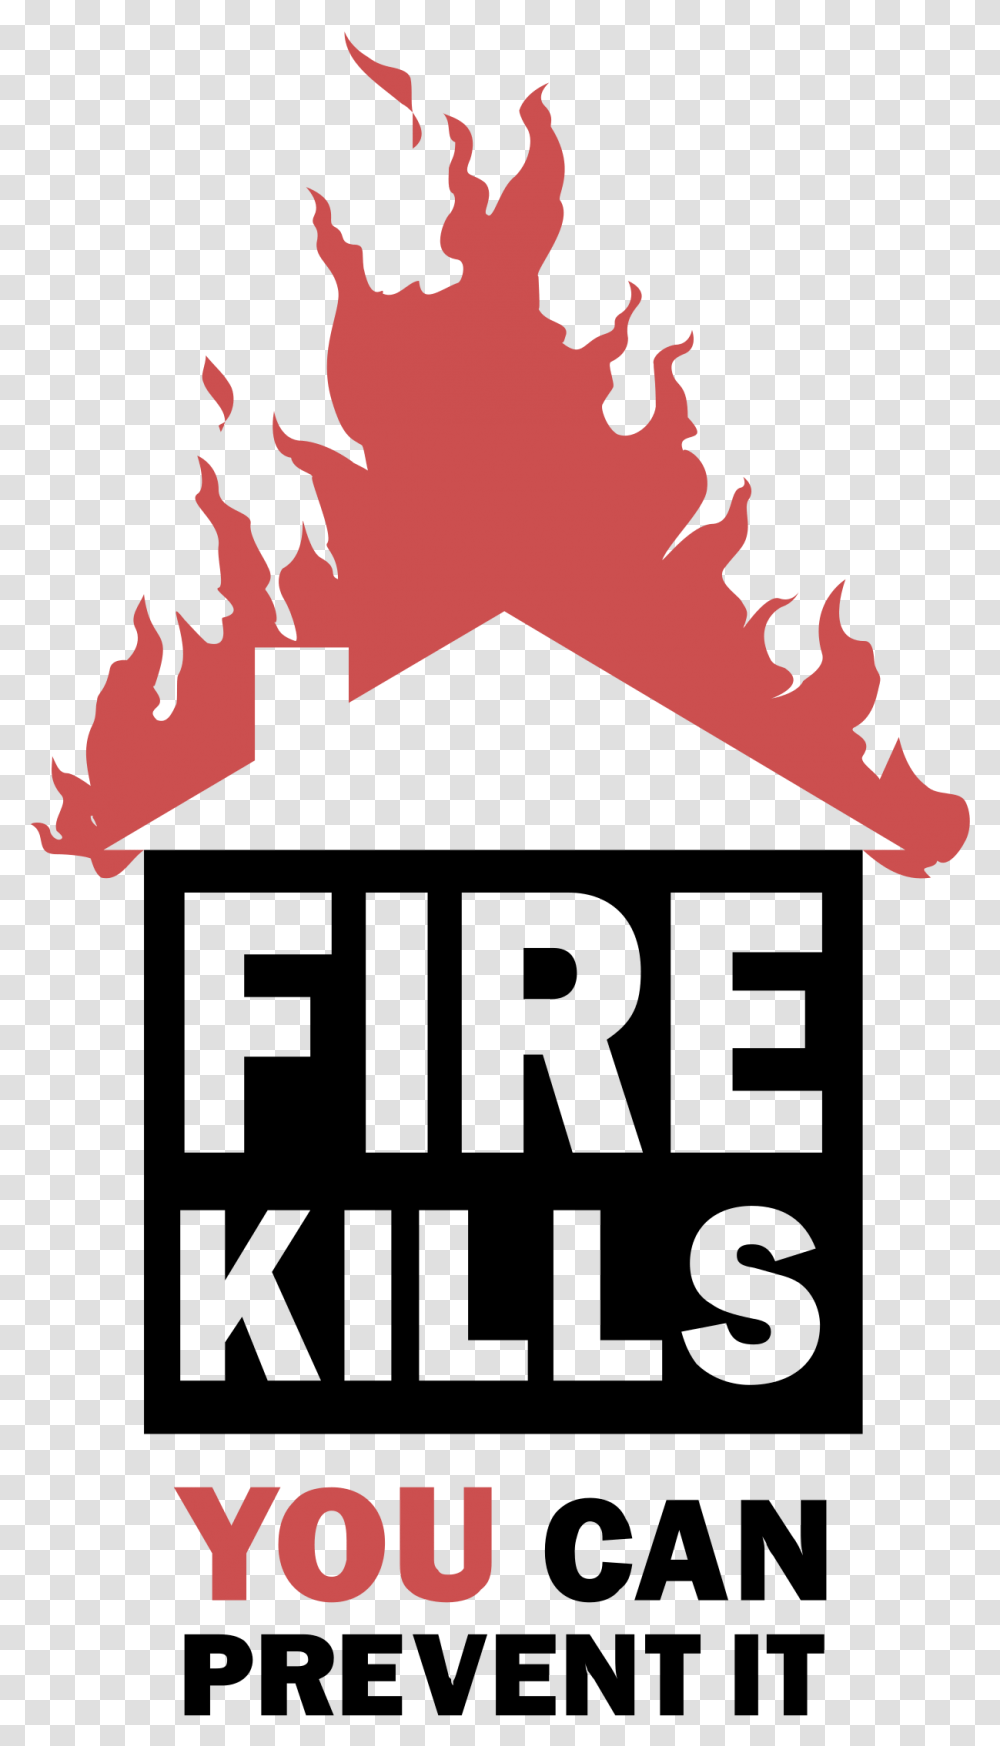 Fire Kills Logo Svg Fire Safety Fire Awareness Posters, Leaf, Plant, Tree, Outdoors Transparent Png